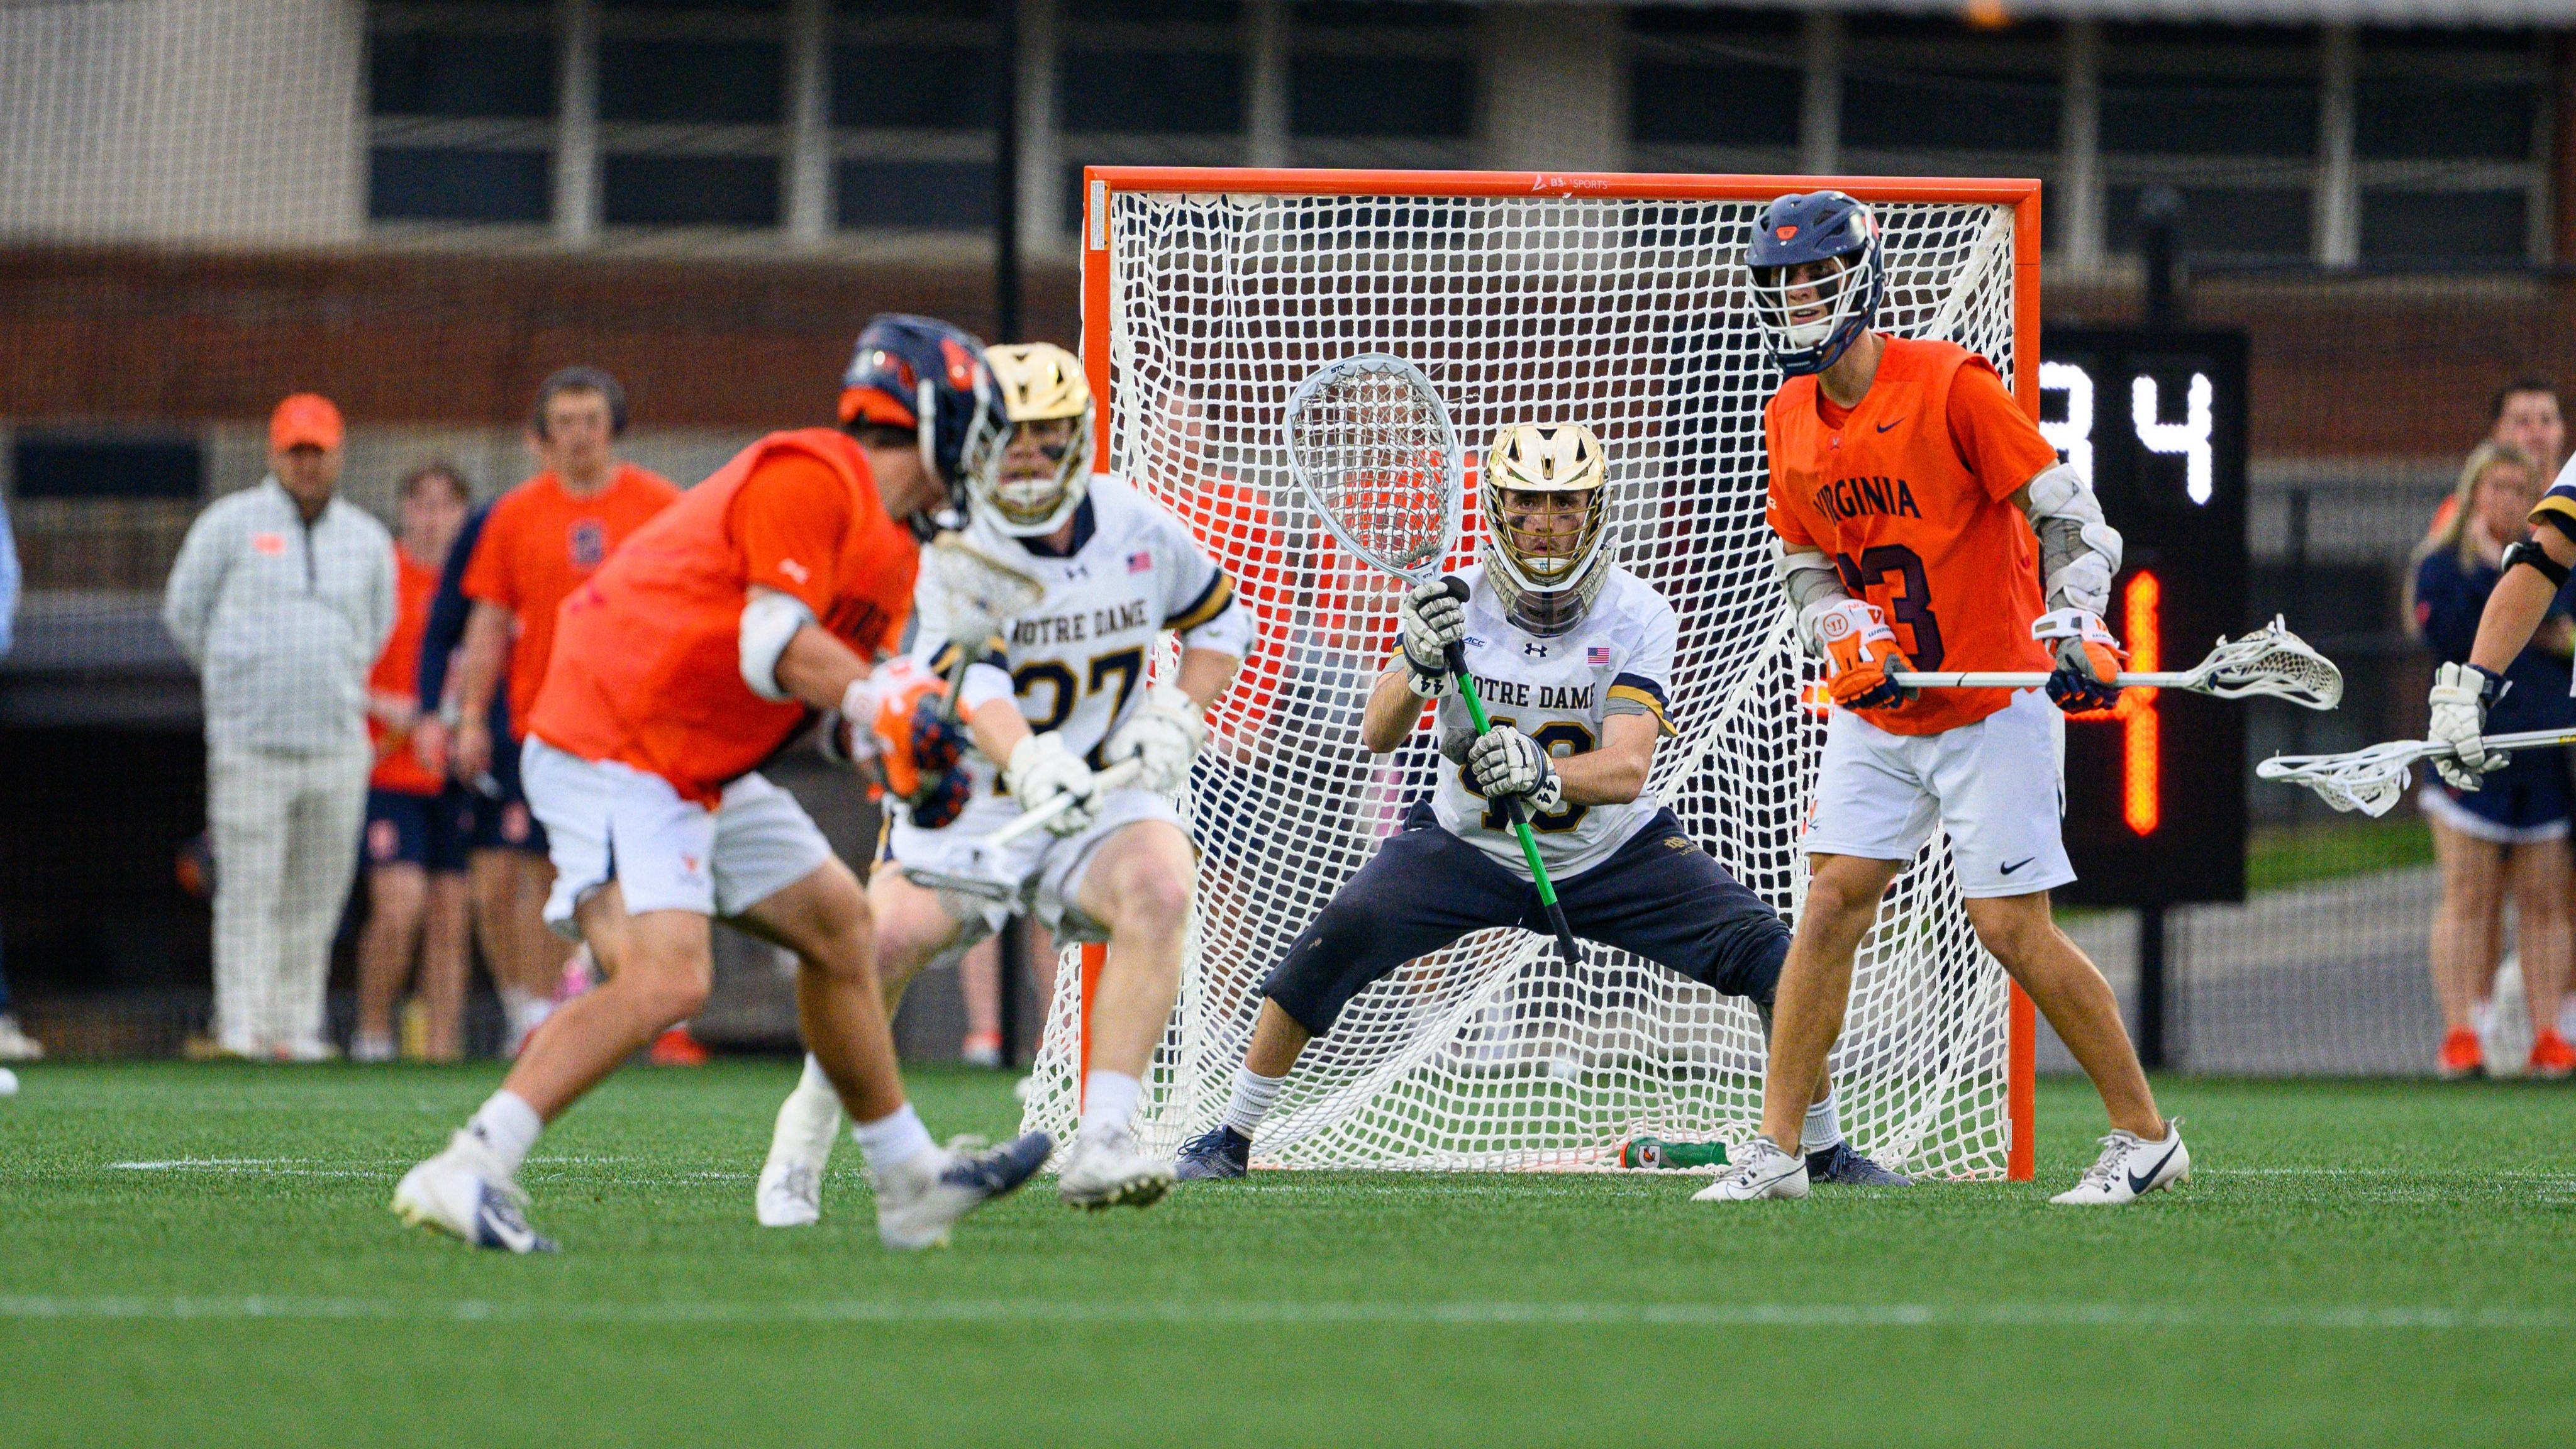 Connor Shellenberger attempts a shot during the Virginia men's lacrosse game against Notre Dame in the ACC semifinals.